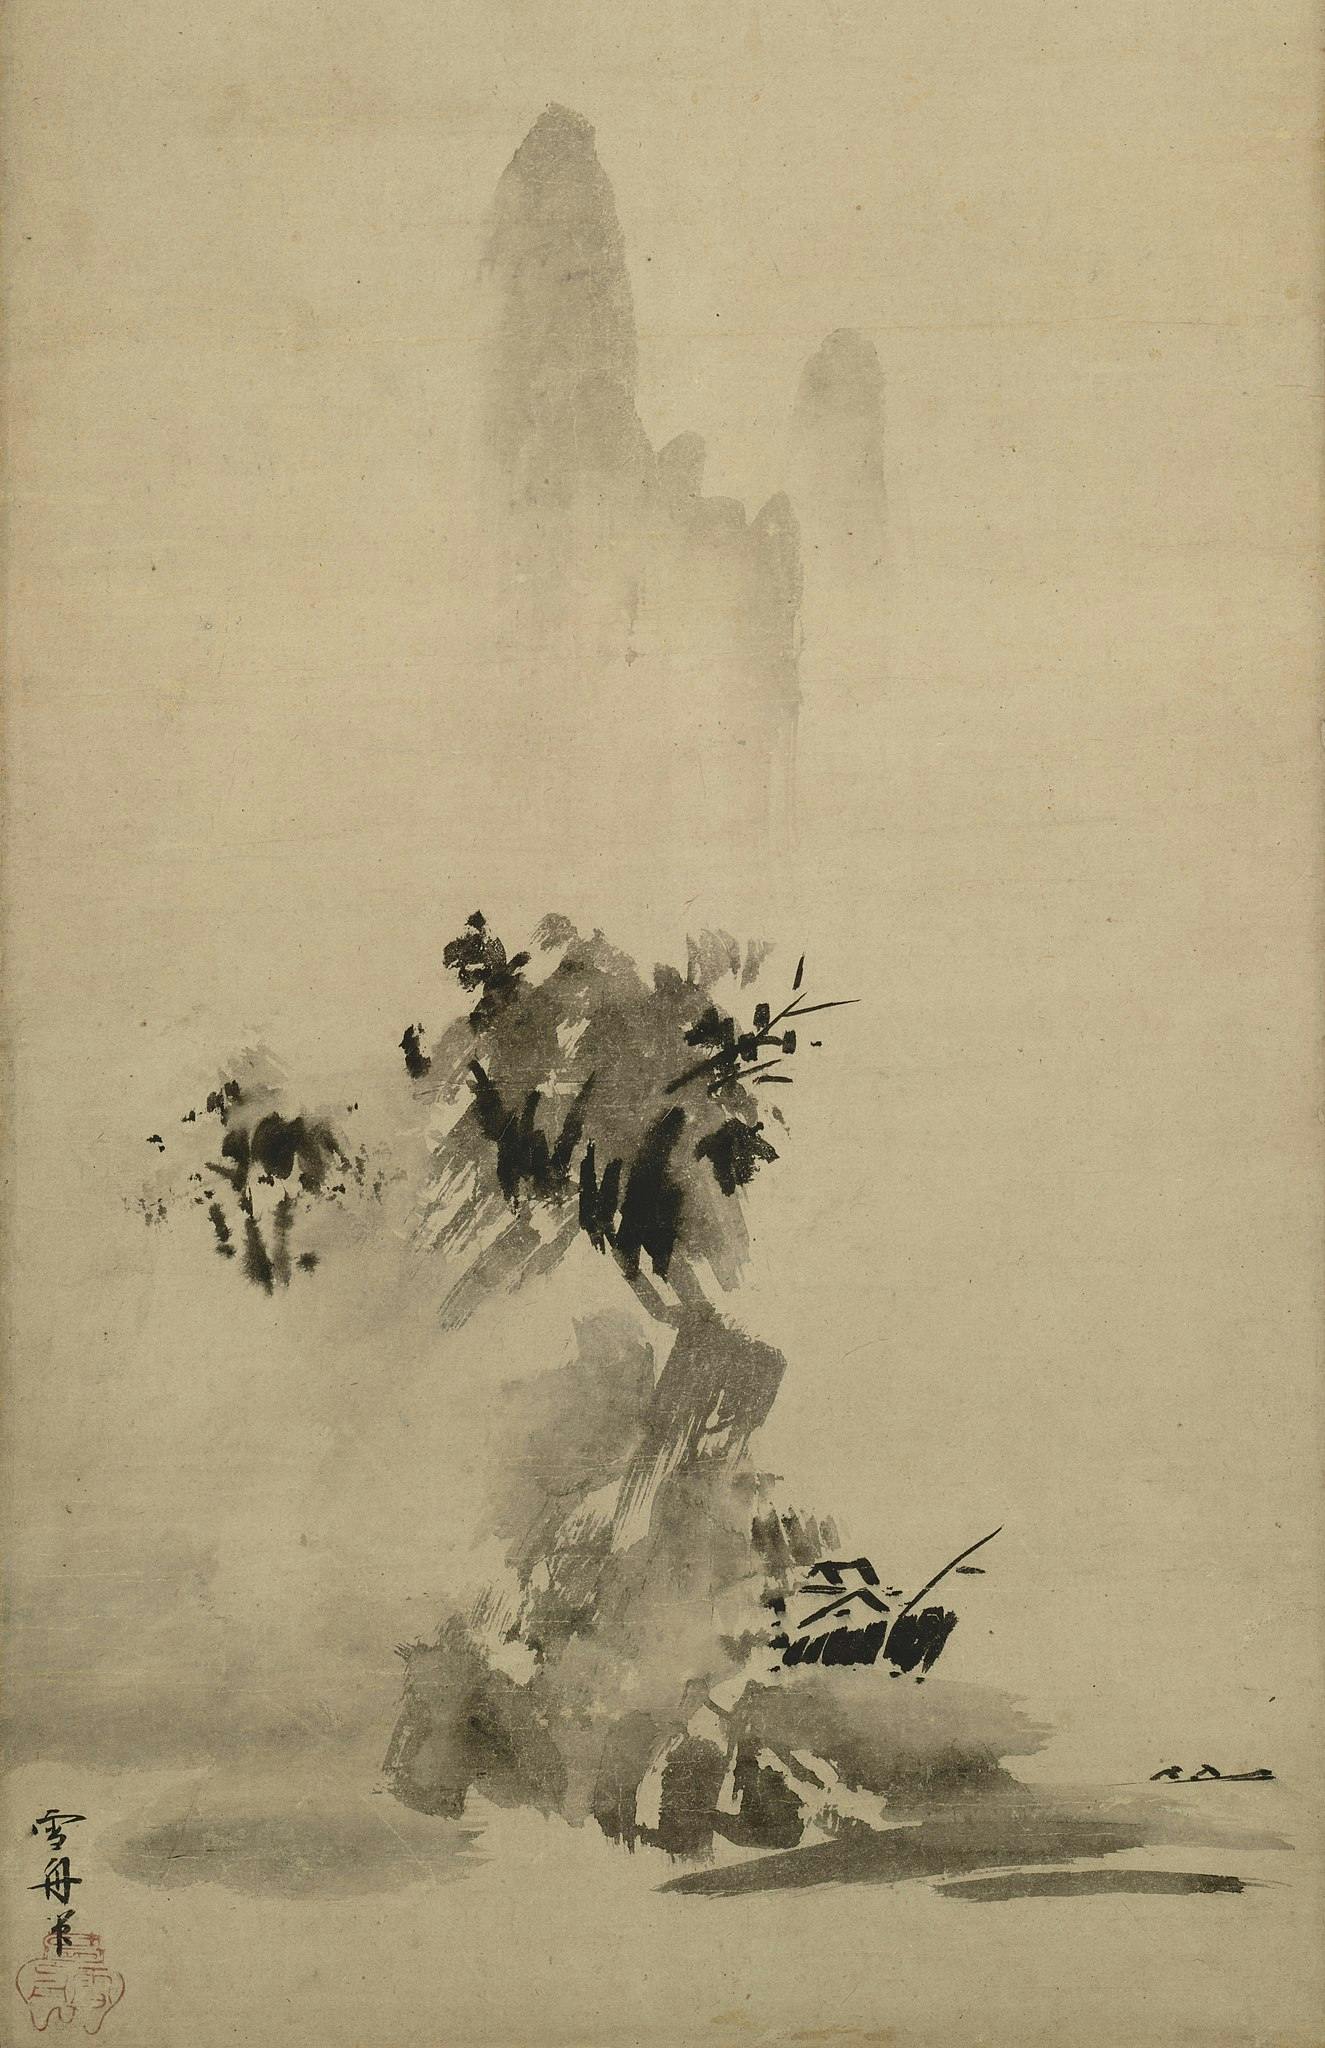 Sesshū’s Splashed-Ink Landscape, made in 1495. From one ink, variously diluted and masterfully applied, springs an evocative mountain scene: a wine tavern by a lake, complete with two boaters at the bottom right